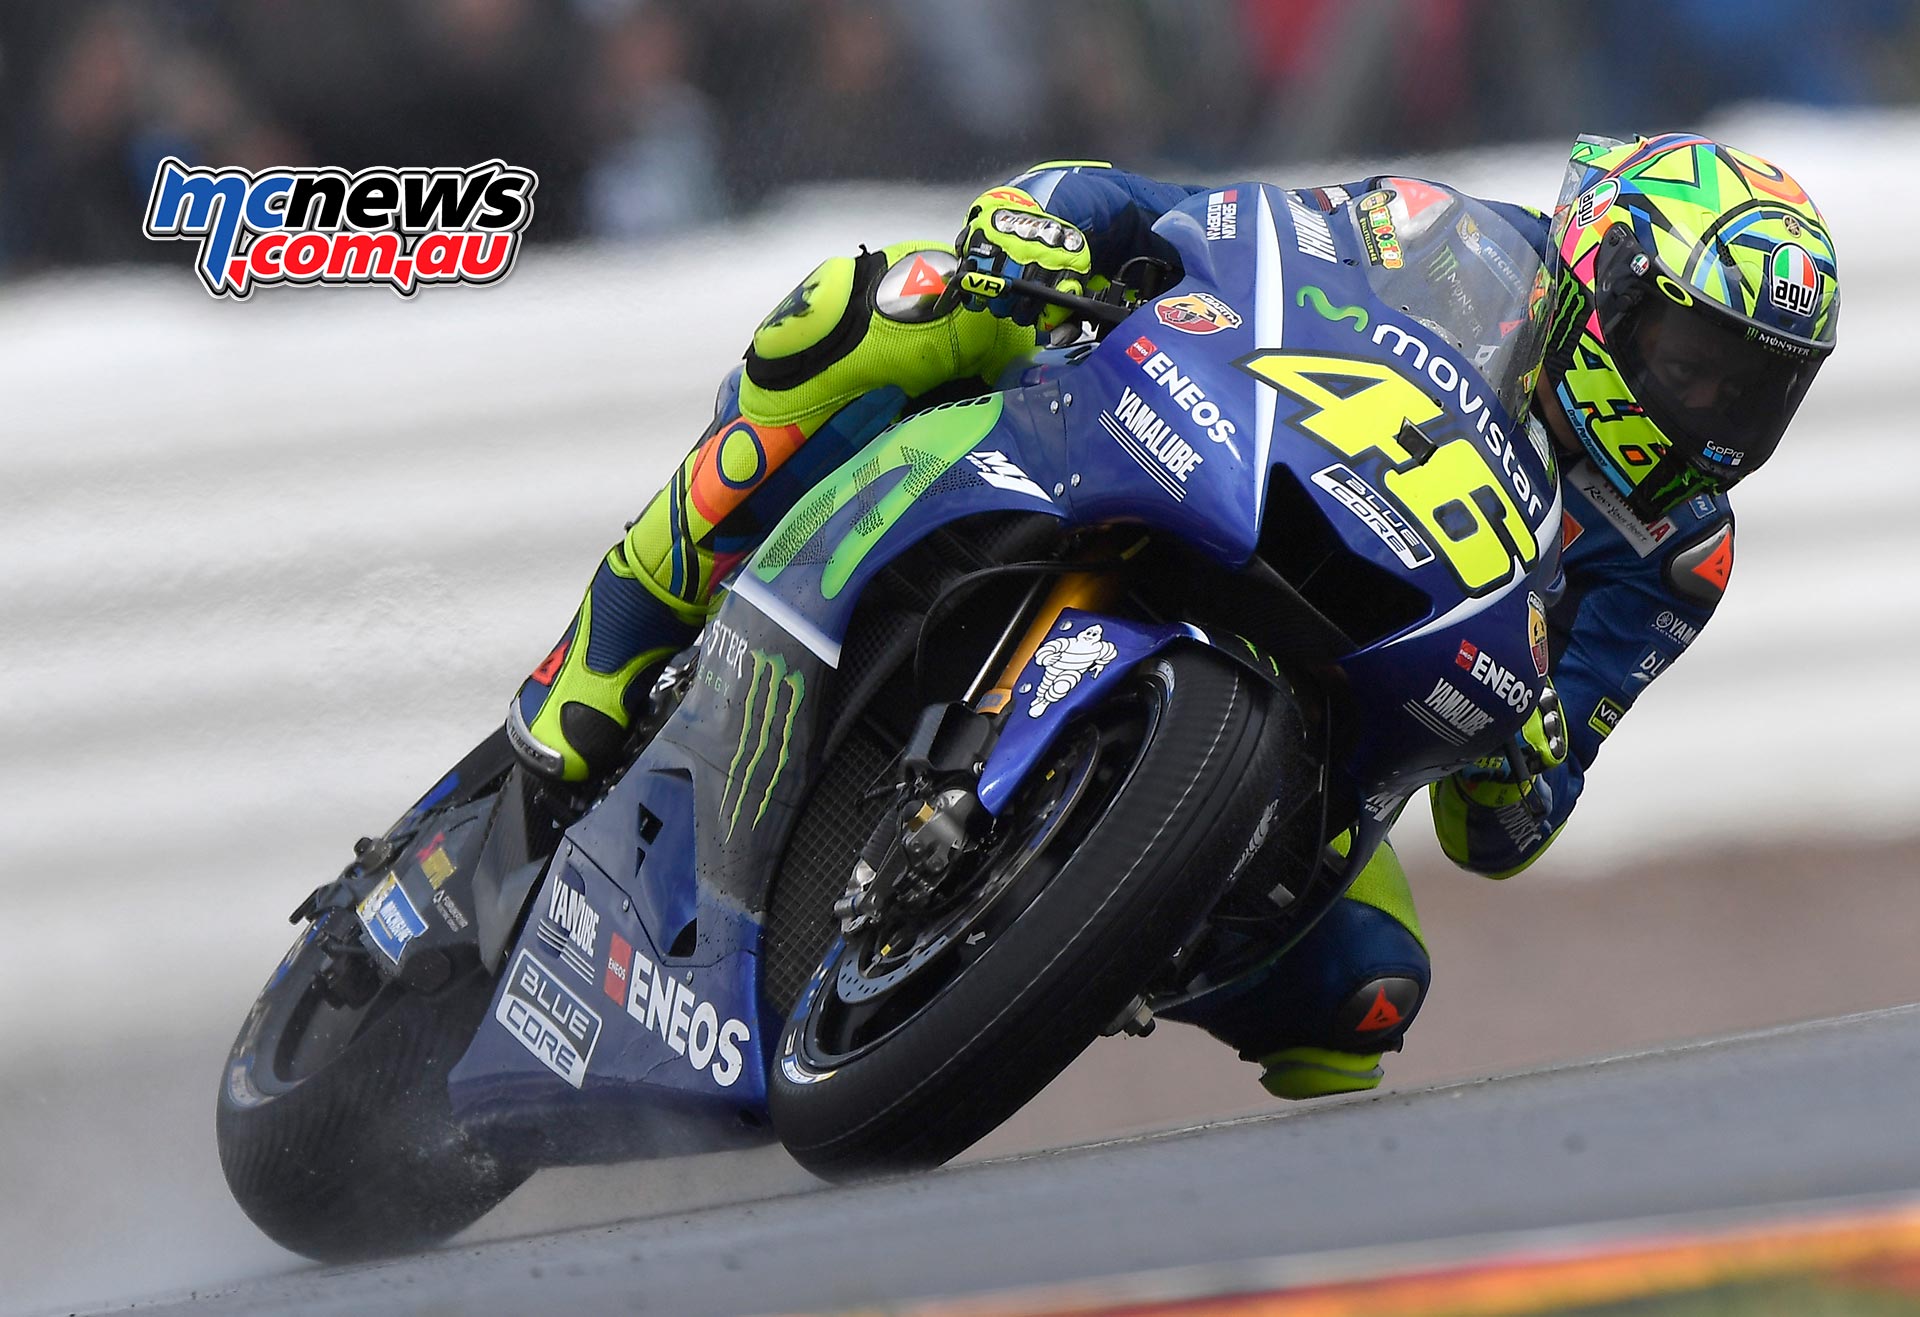 Valentino Rossi, 41, signs up for another year in MotoGP - Eurosport